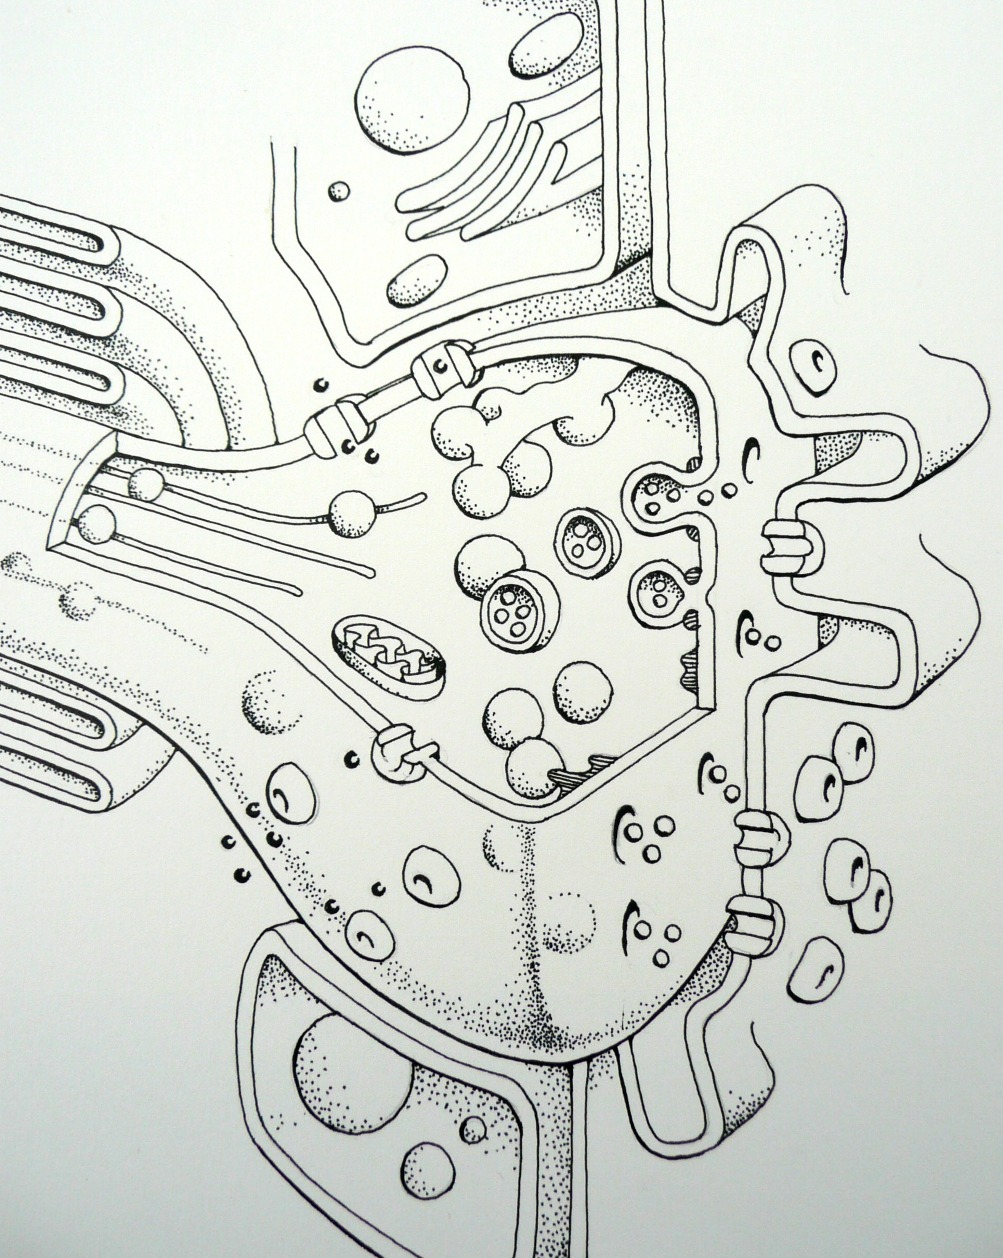 synapse pen an ink drawing